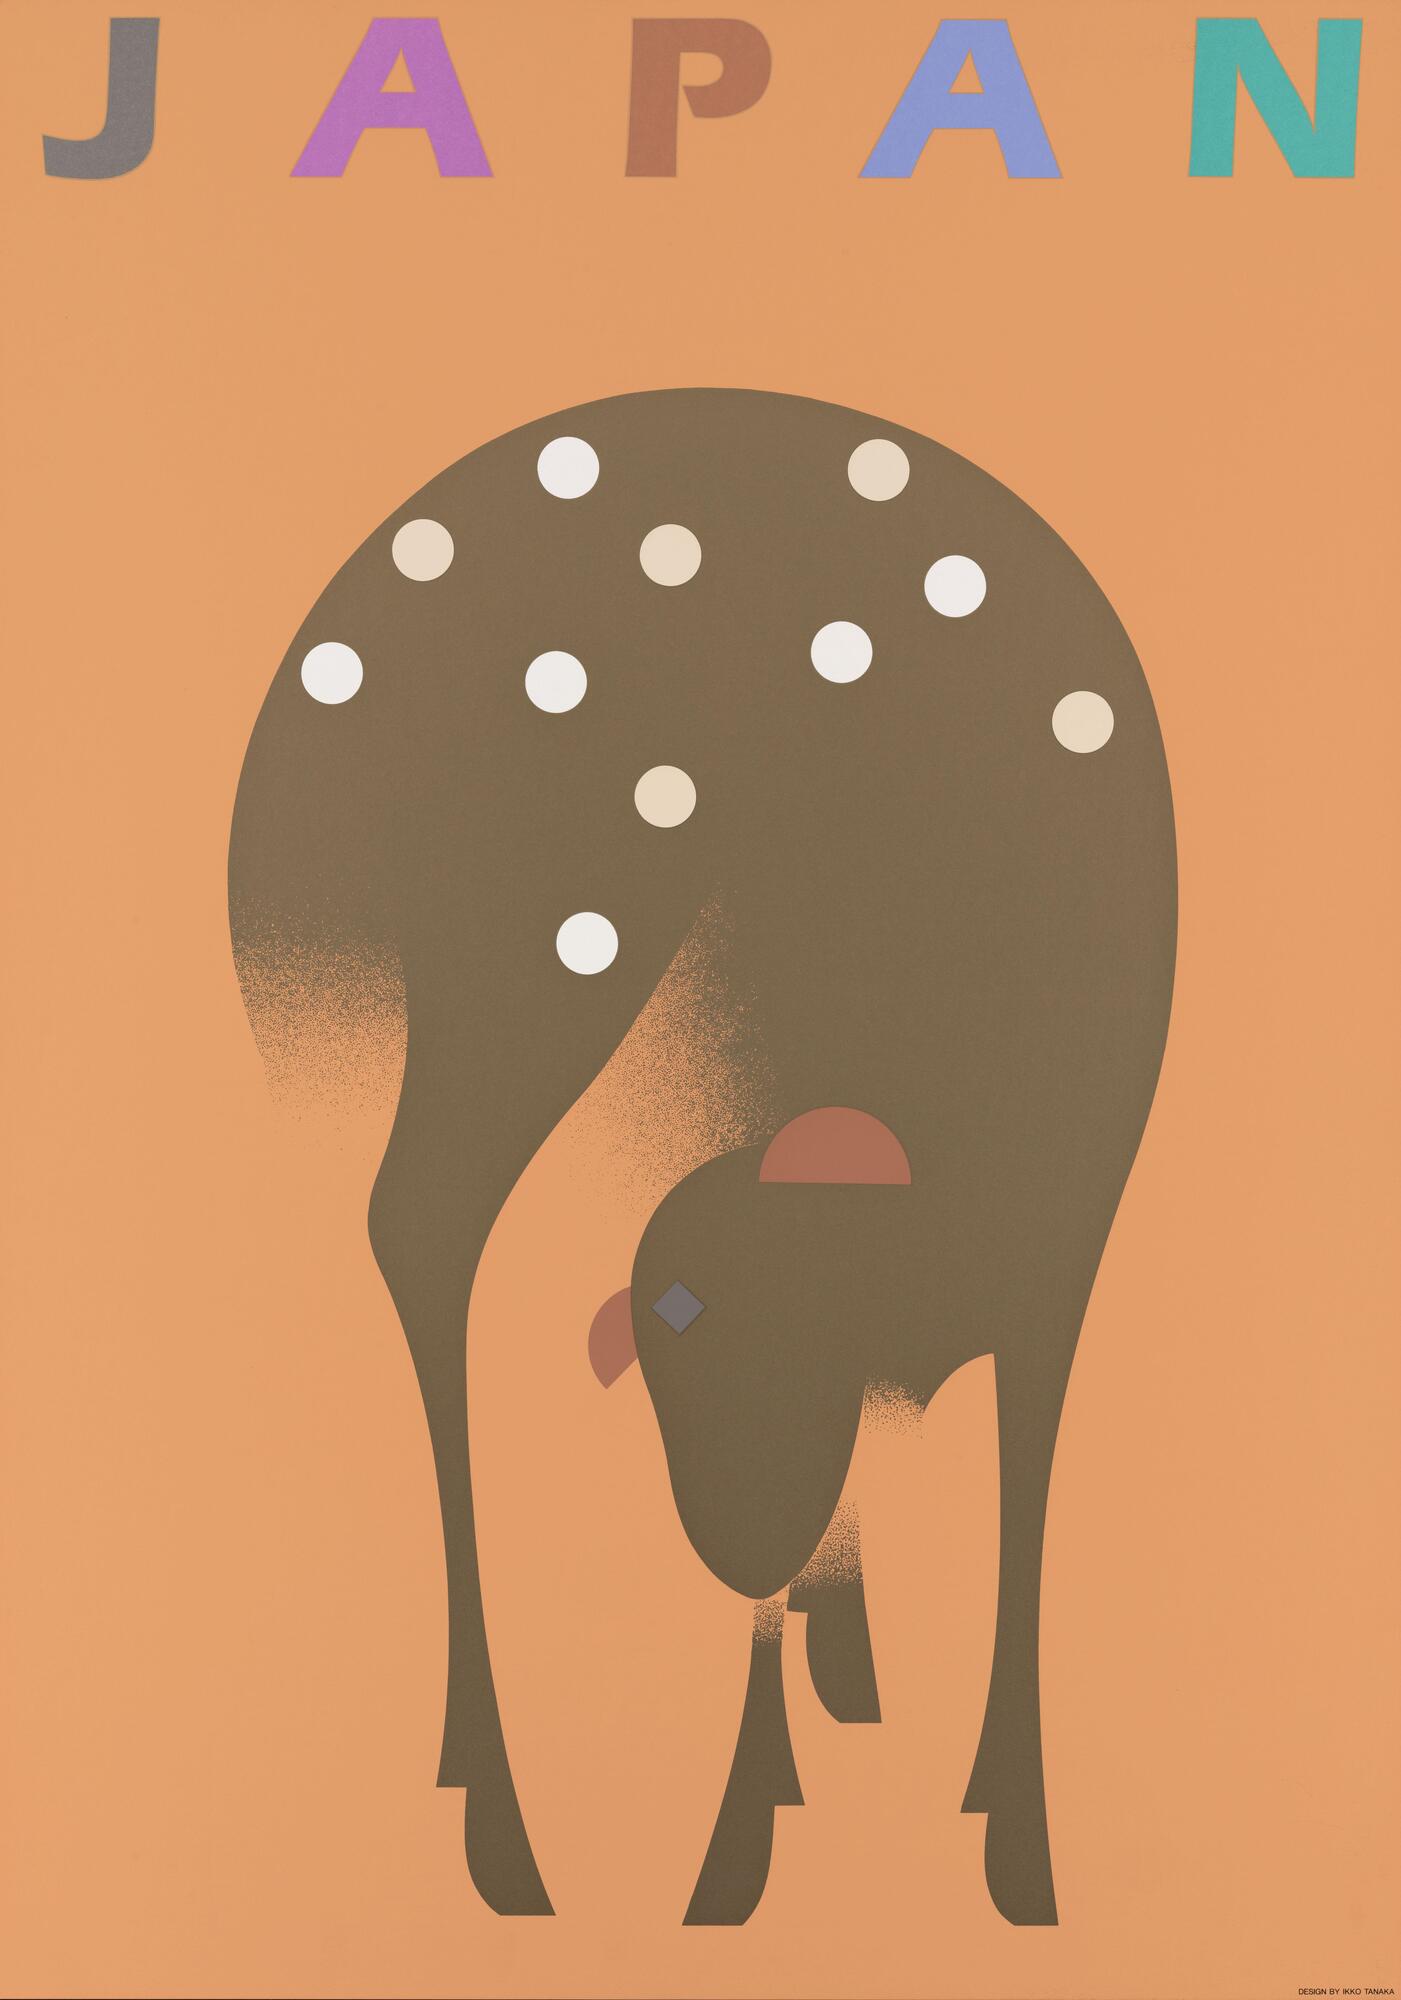 Gold deer beneath the text "JAPAN" on an orange background.